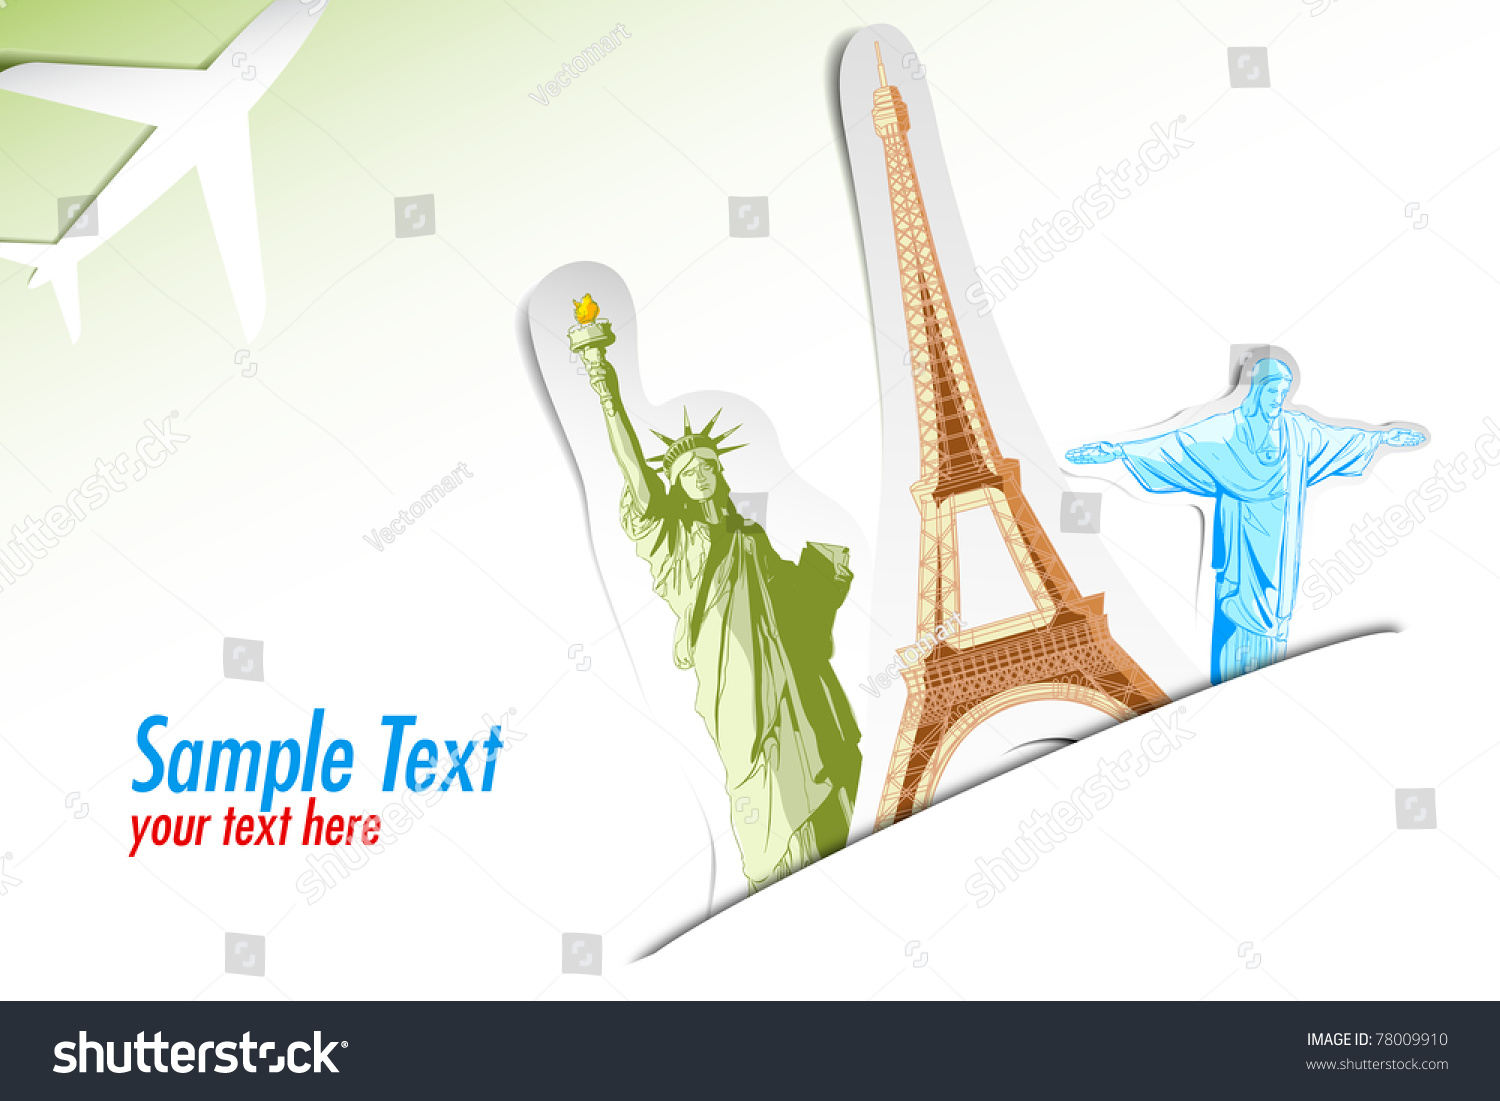 SVG of illustration of travel background with statue of liberty, eiffel tower and airplane svg